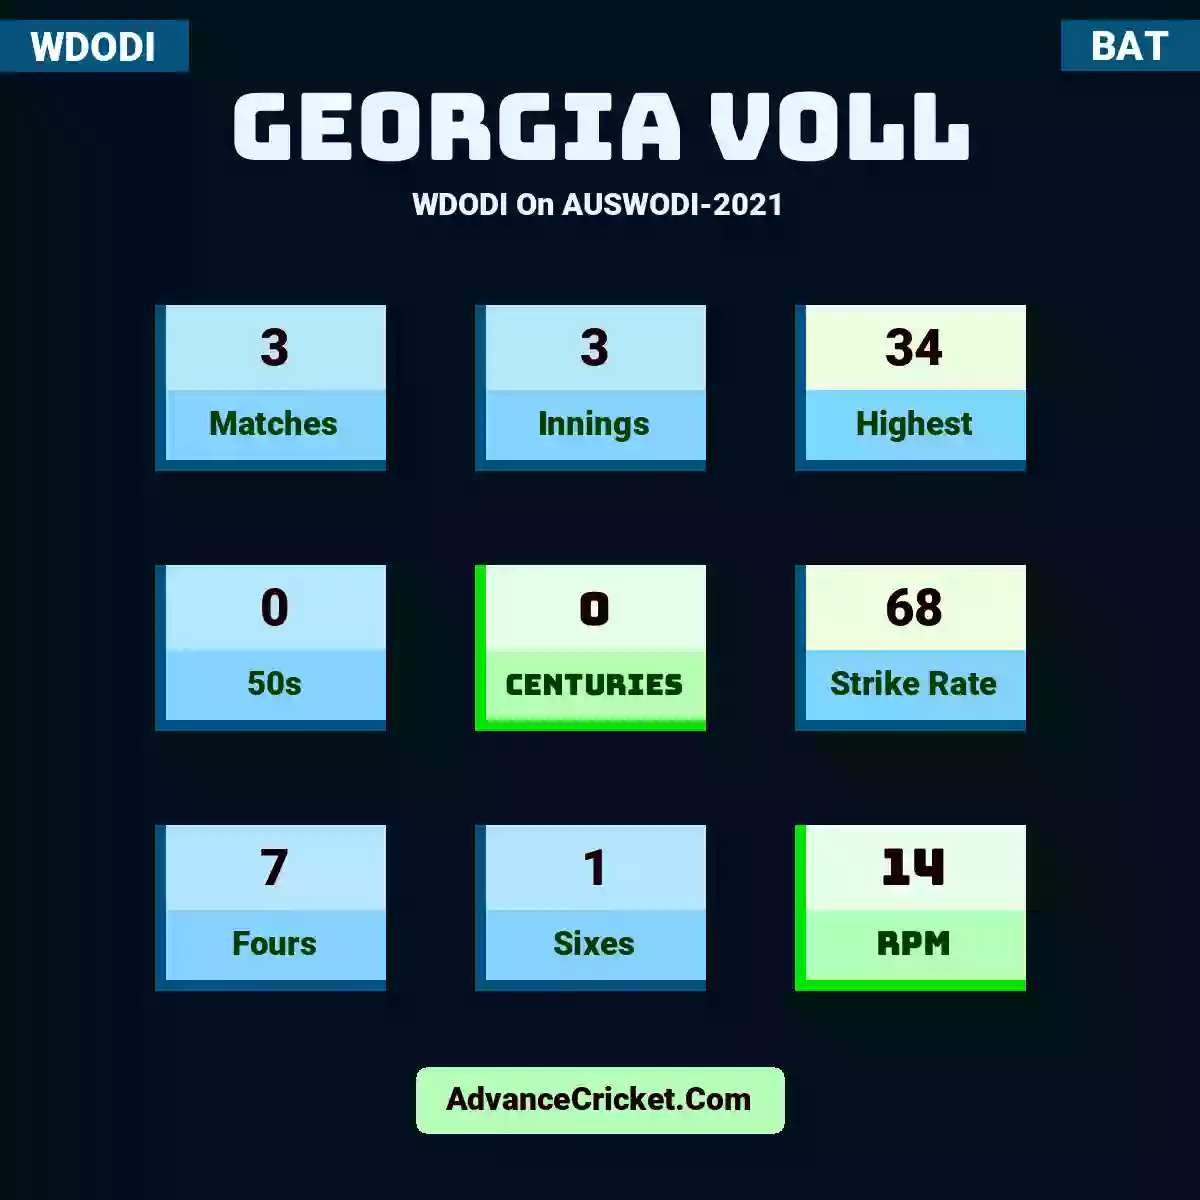 Georgia Voll WDODI  On AUSWODI-2021, Georgia Voll played 3 matches, scored 34 runs as highest, 0 half-centuries, and 0 centuries, with a strike rate of 68. G.Voll hit 7 fours and 1 sixes, with an RPM of 14.